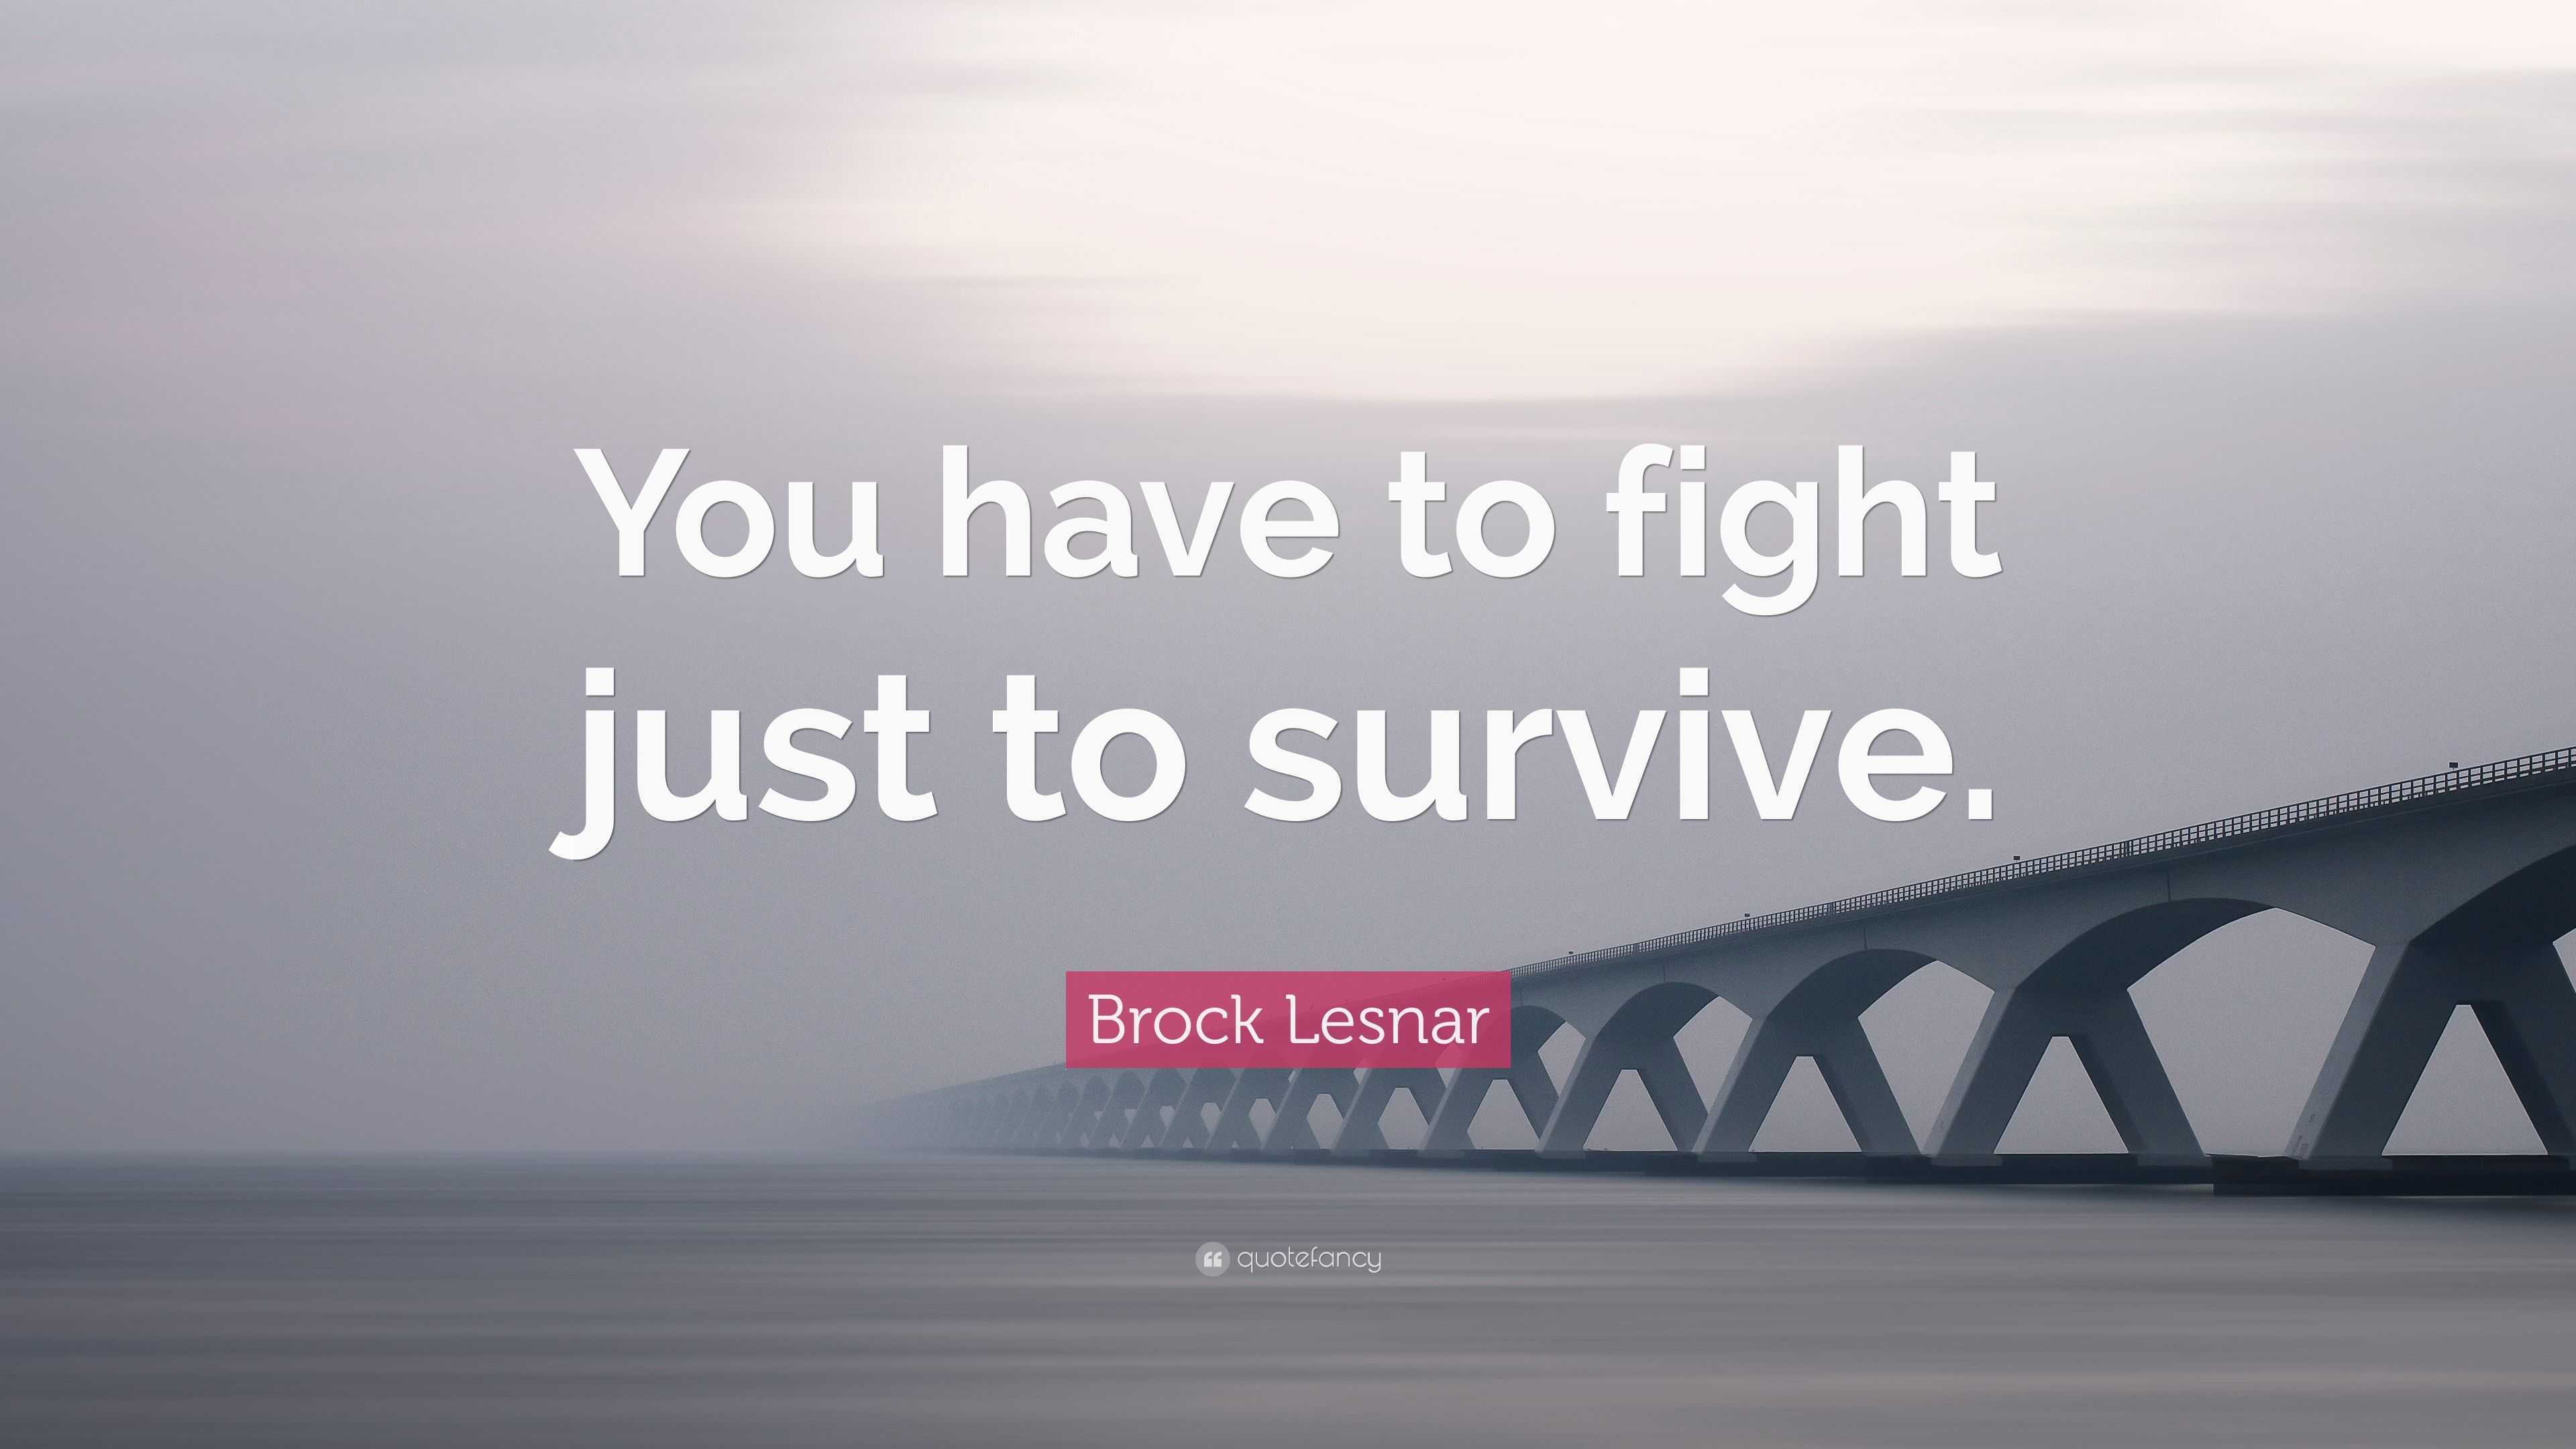 Brock Lesnar Quote: “You have to fight just to survive.”